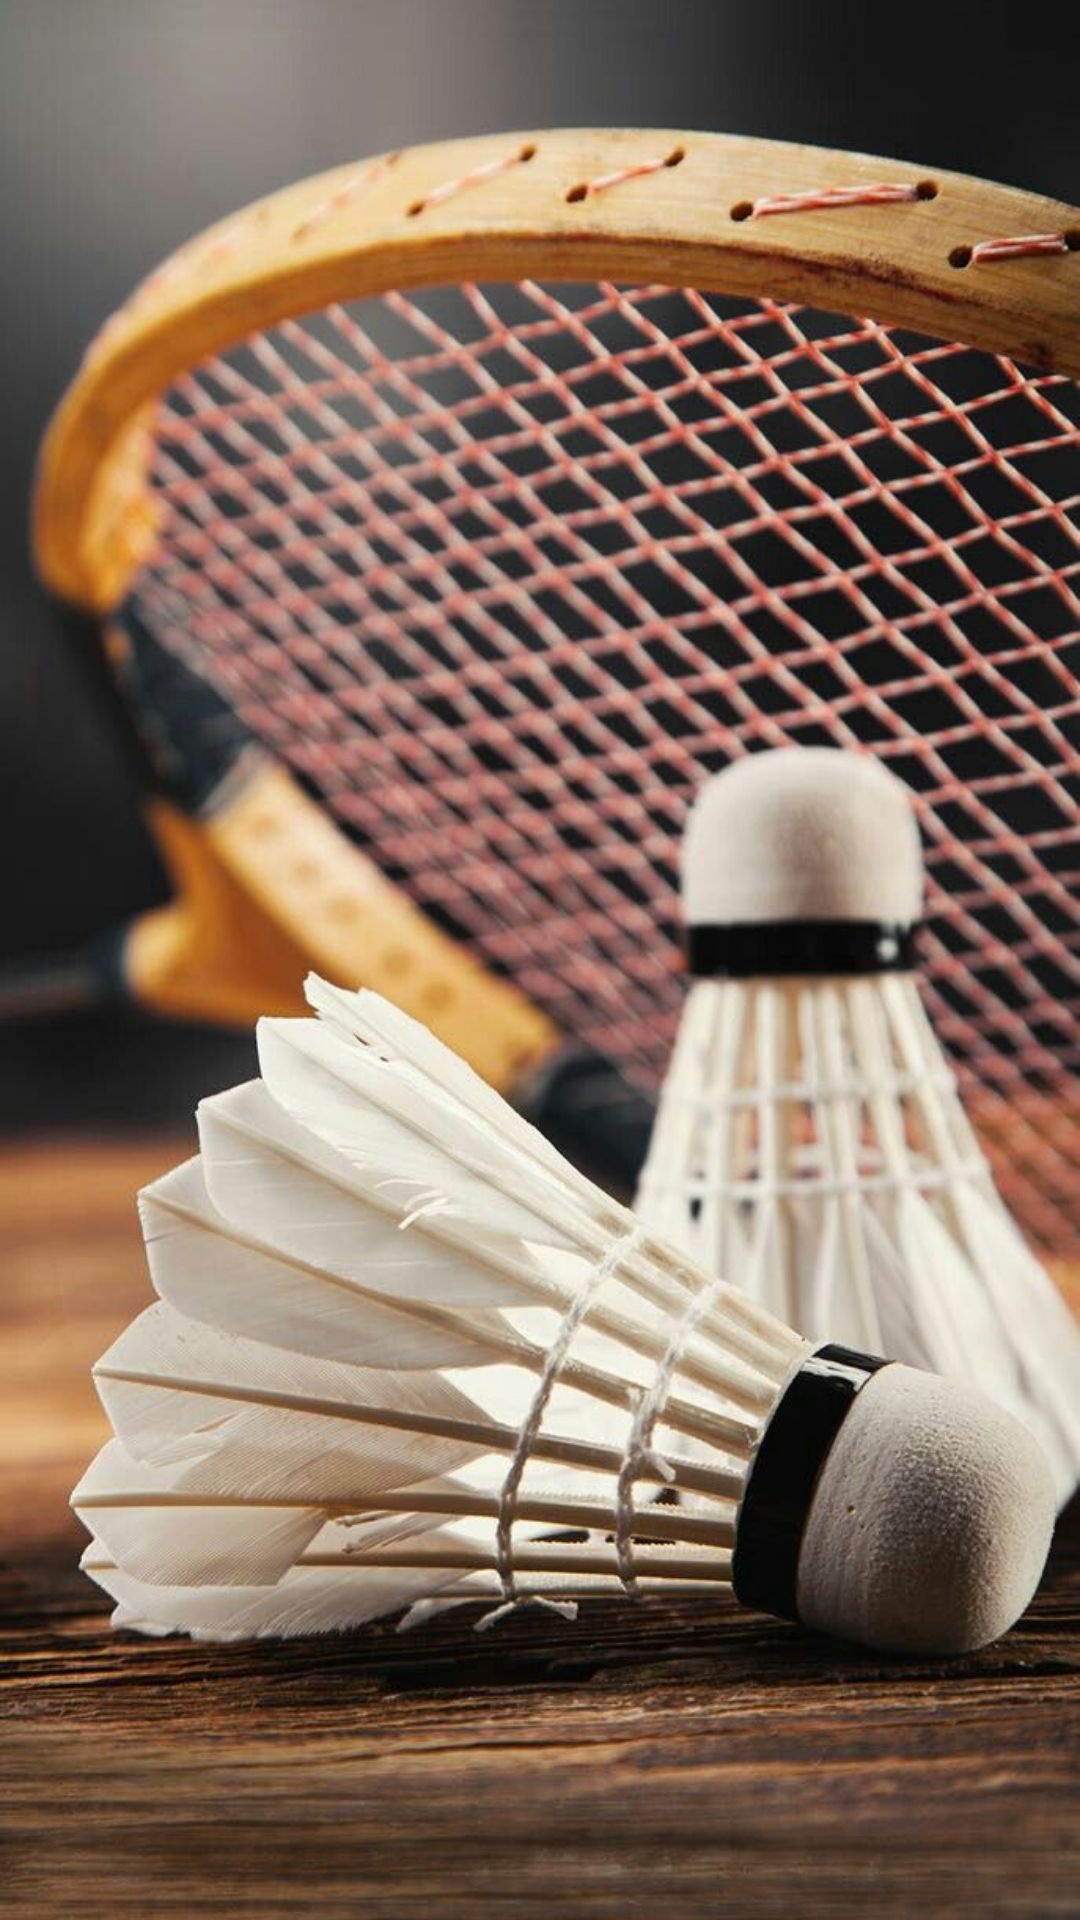 Free badminton wallpapers, Sporting excellence, Athletes in action, Inspiring images, 1080x1920 Full HD Handy